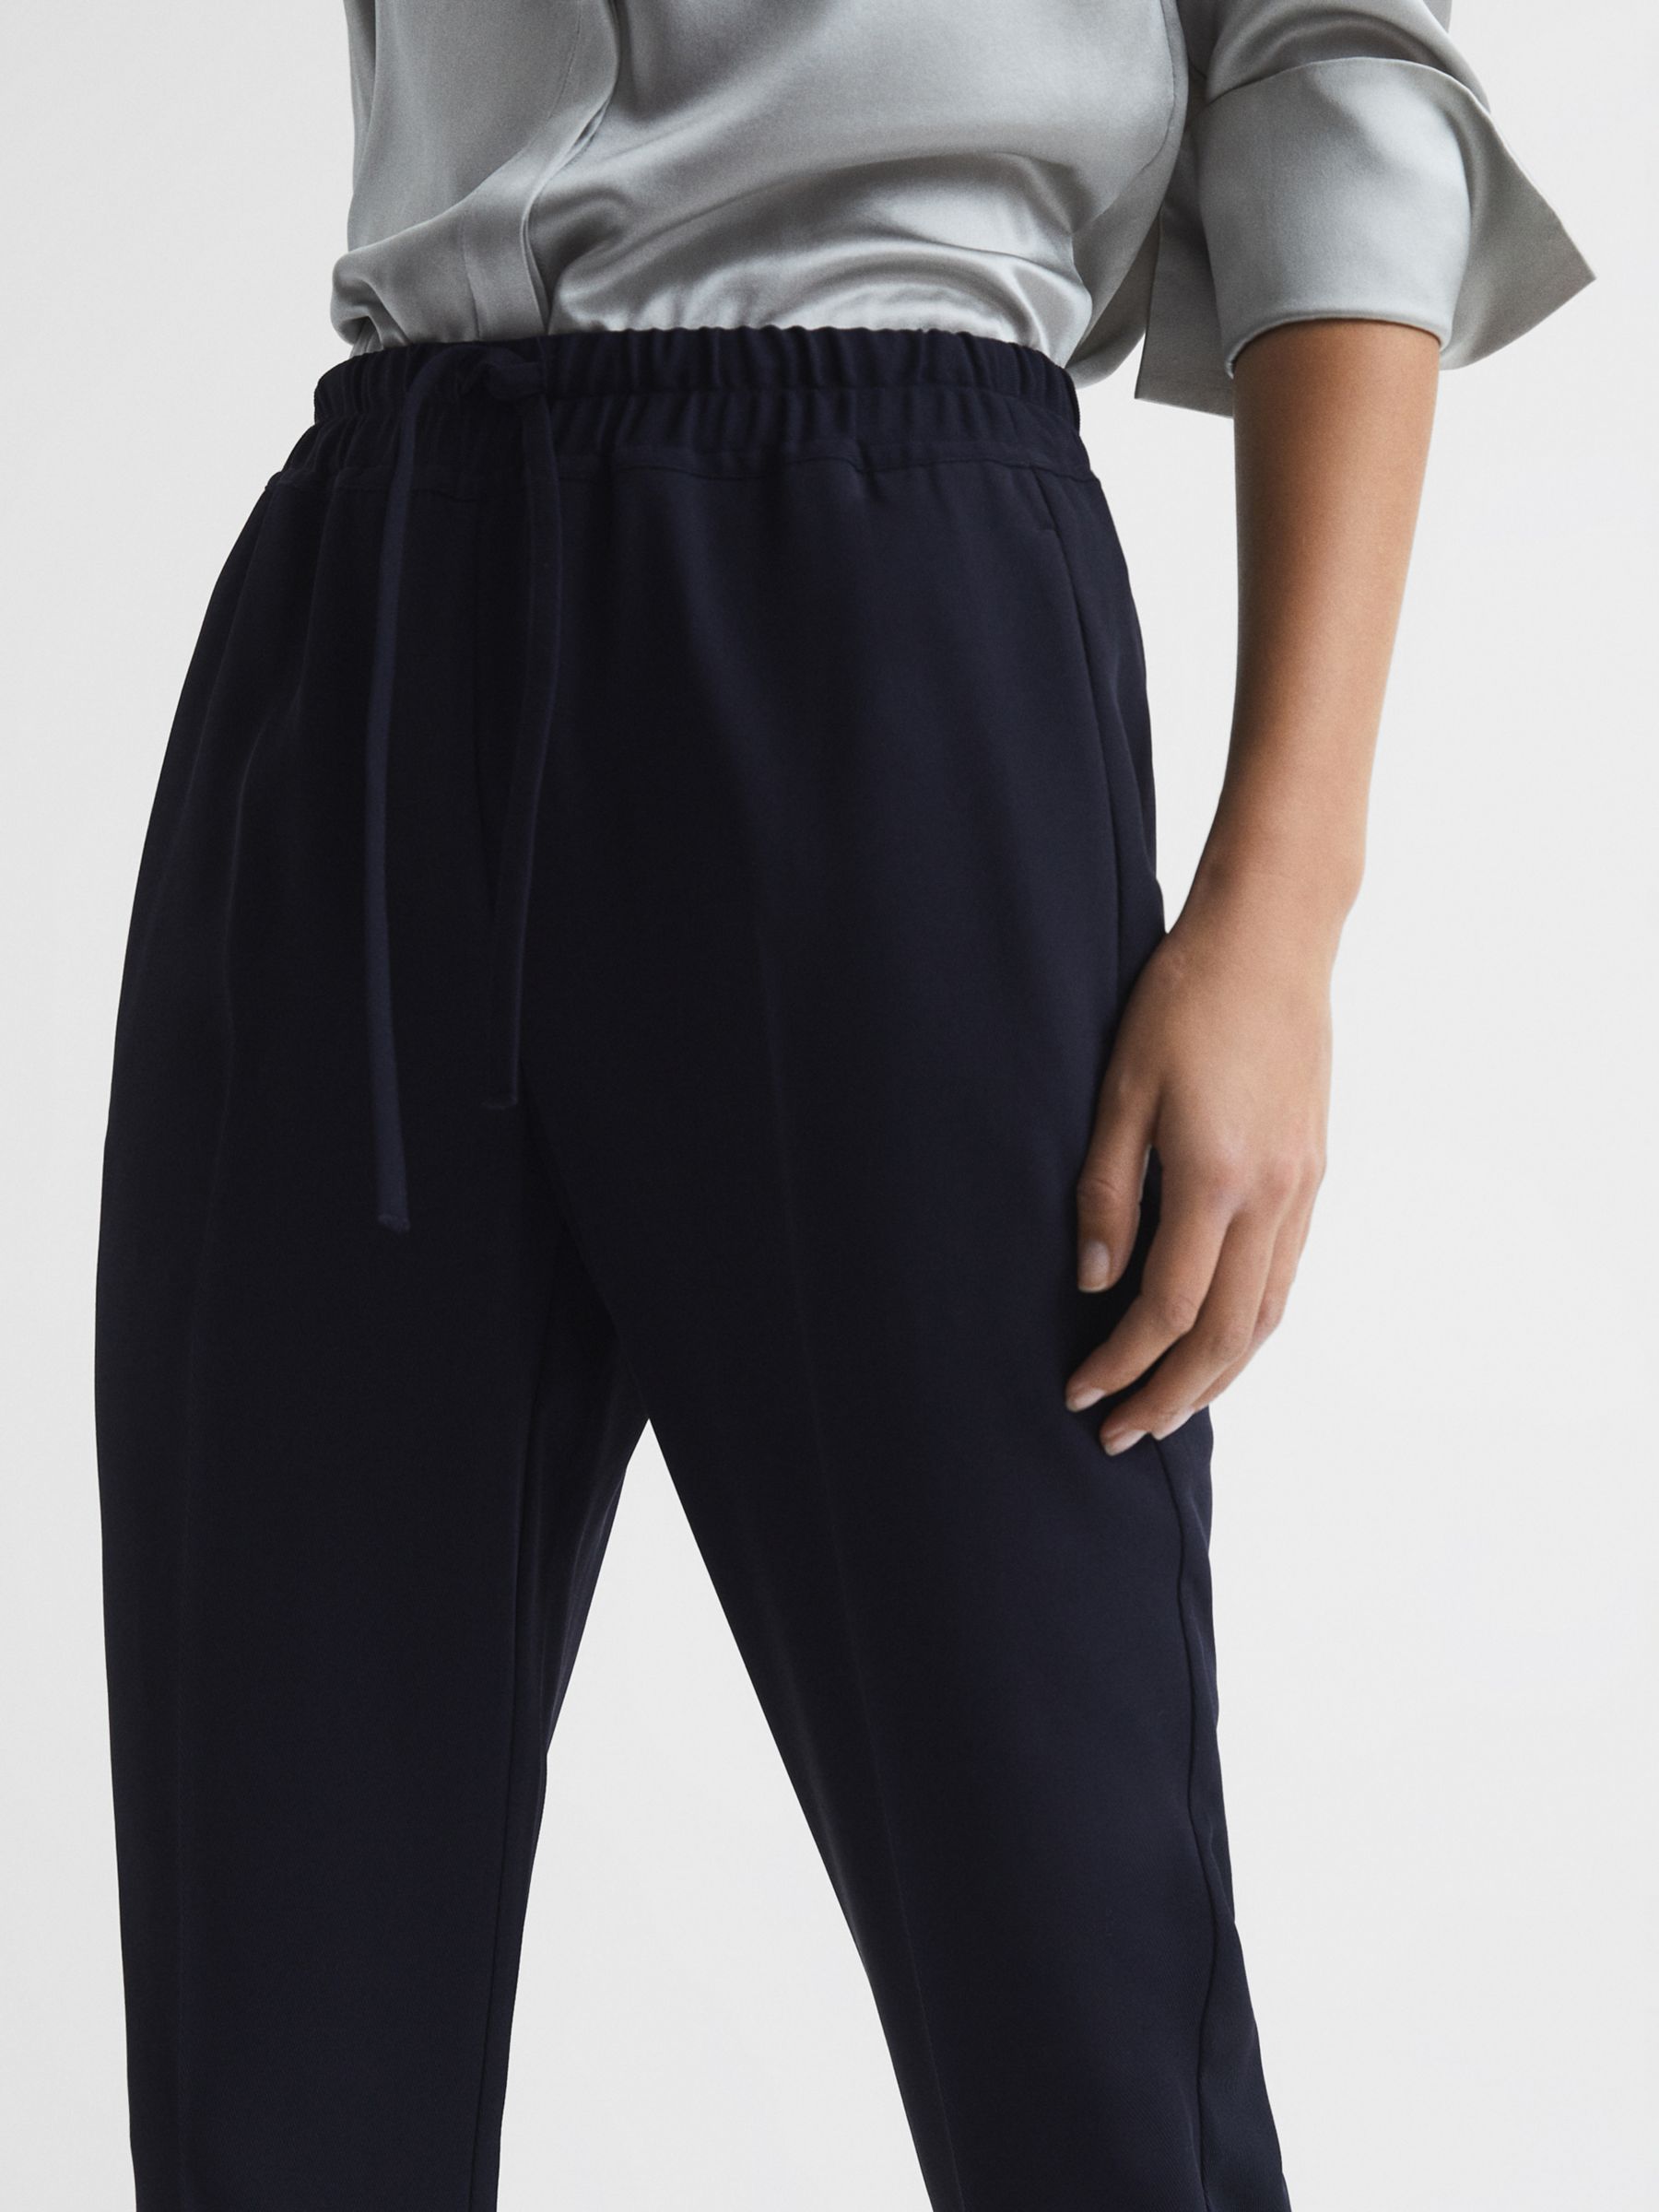 Reiss Petite Hailey Cropped Trousers, Navy at John Lewis & Partners